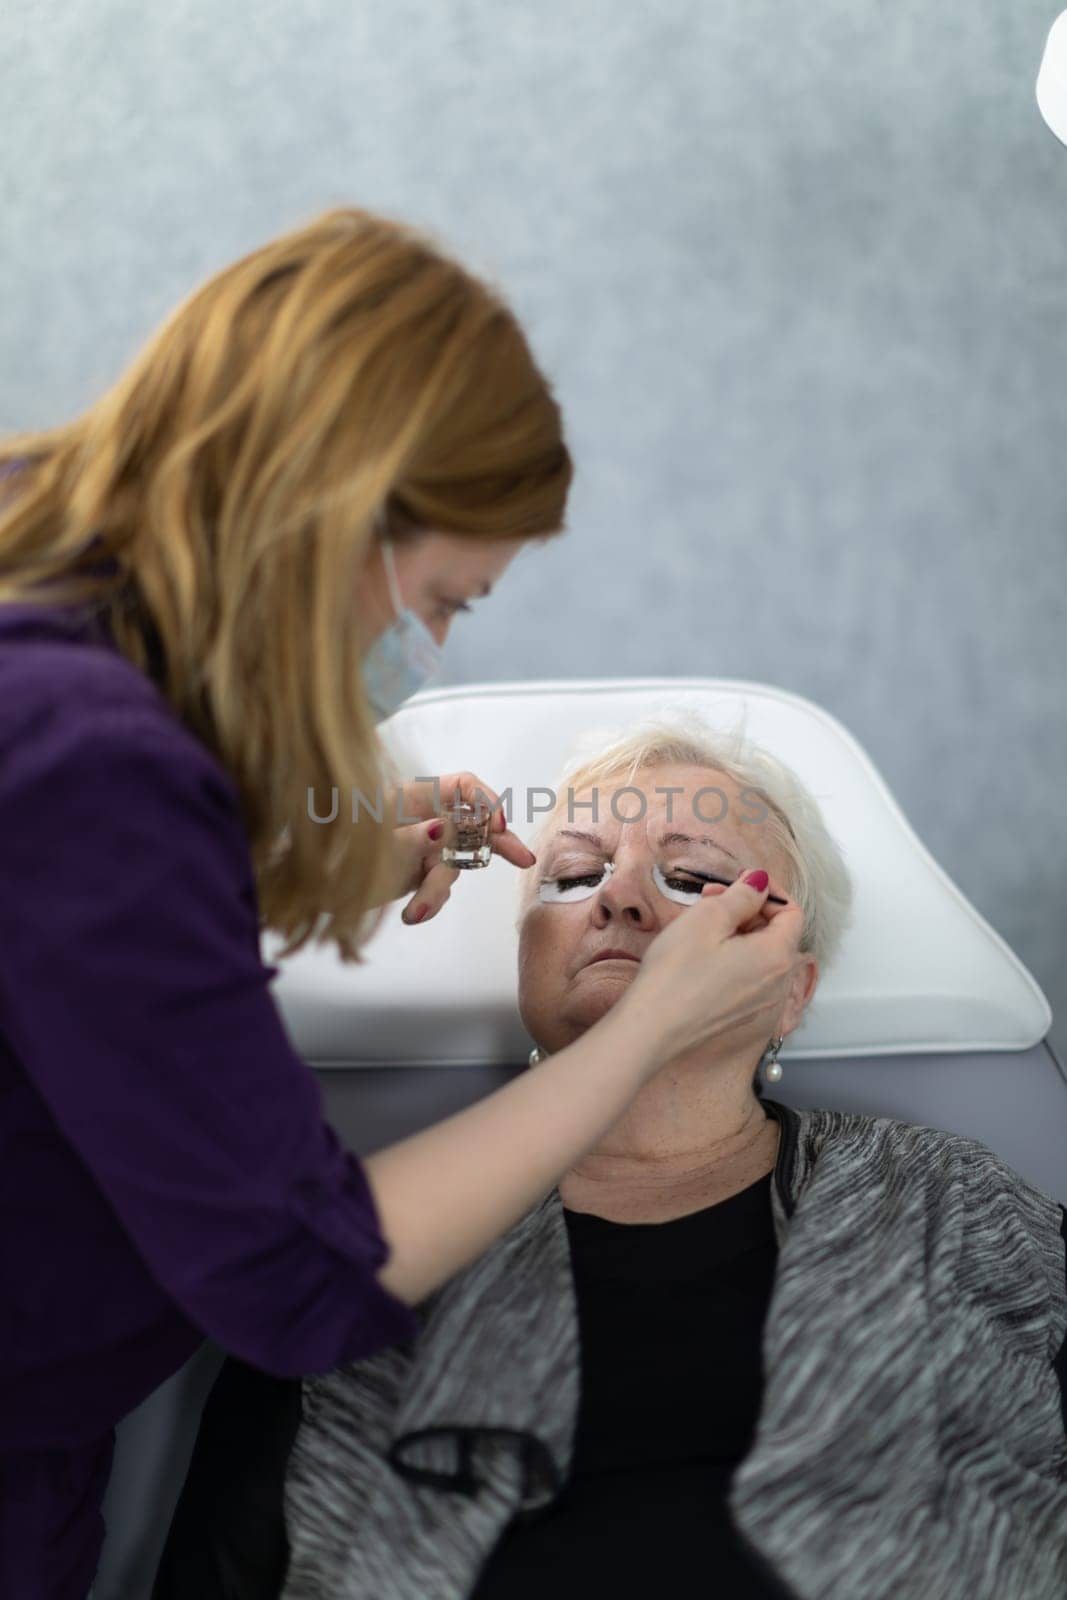 A young woman works as a cosmetologist at a beauty salon. She applies henna to her client's eyelashes.